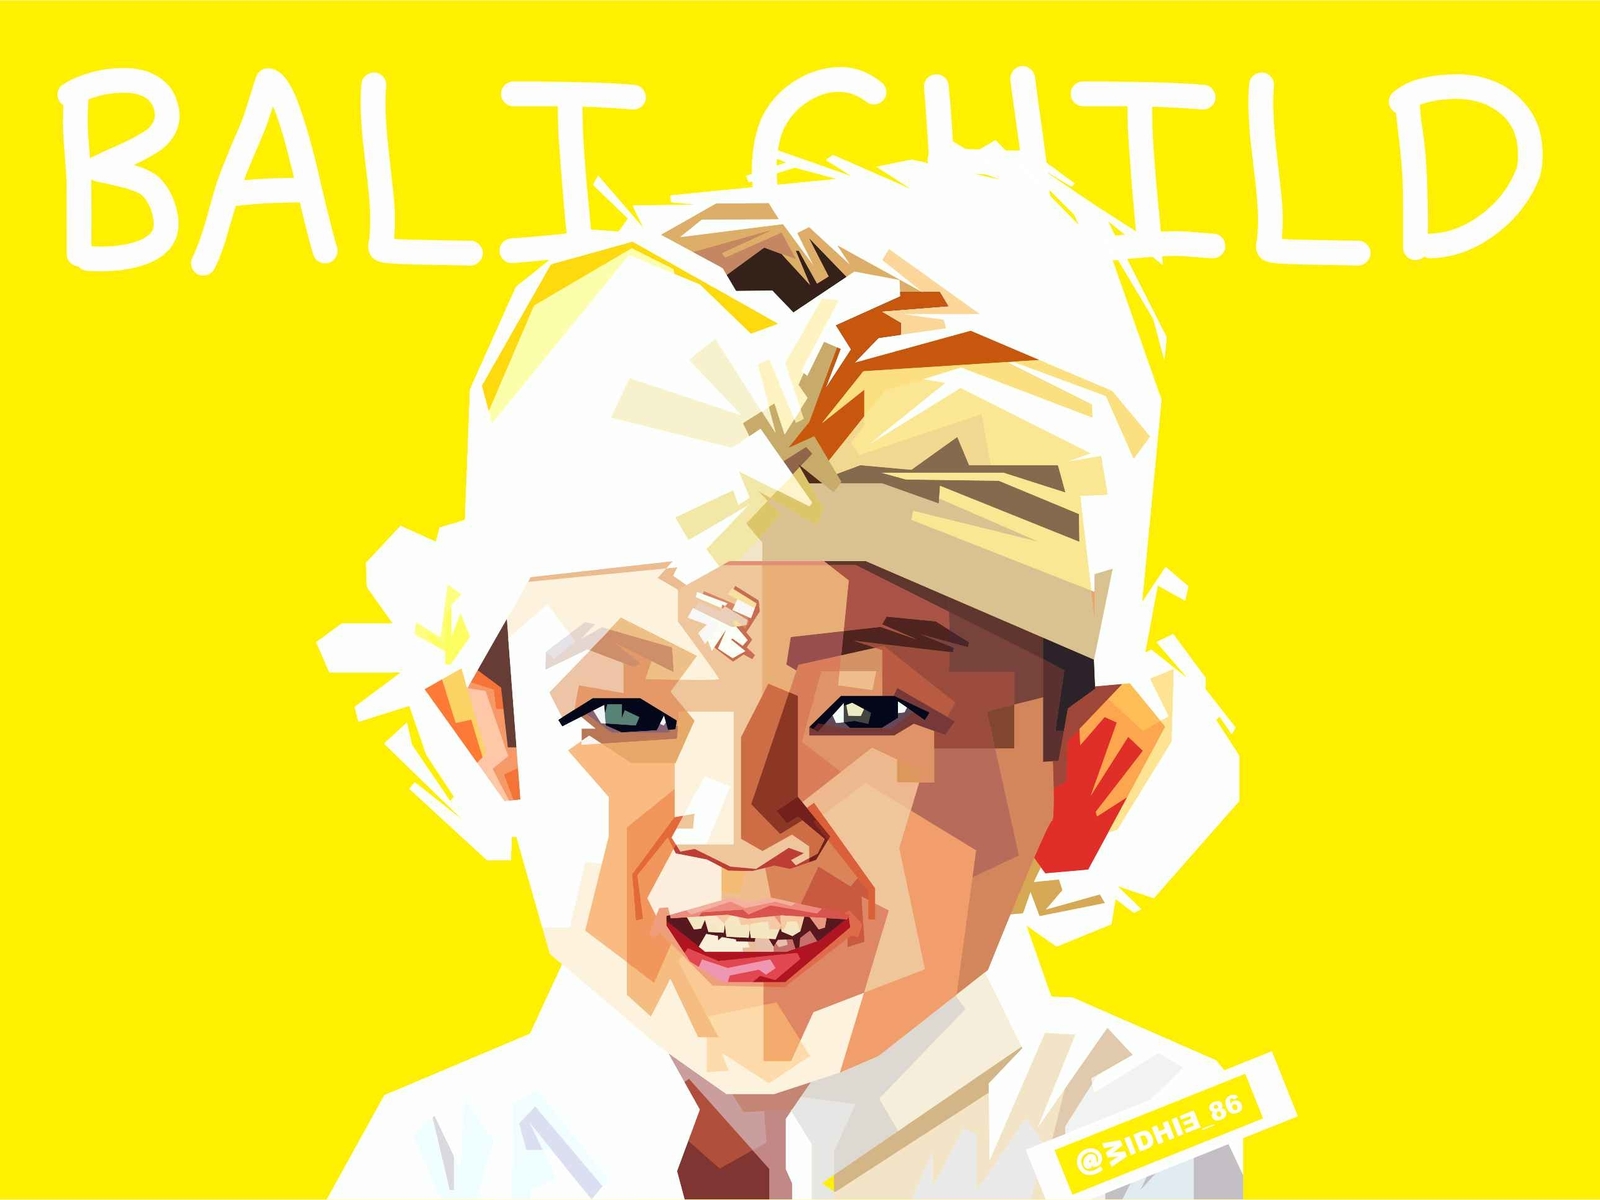 Bali Child by widhie_86 on Dribbble